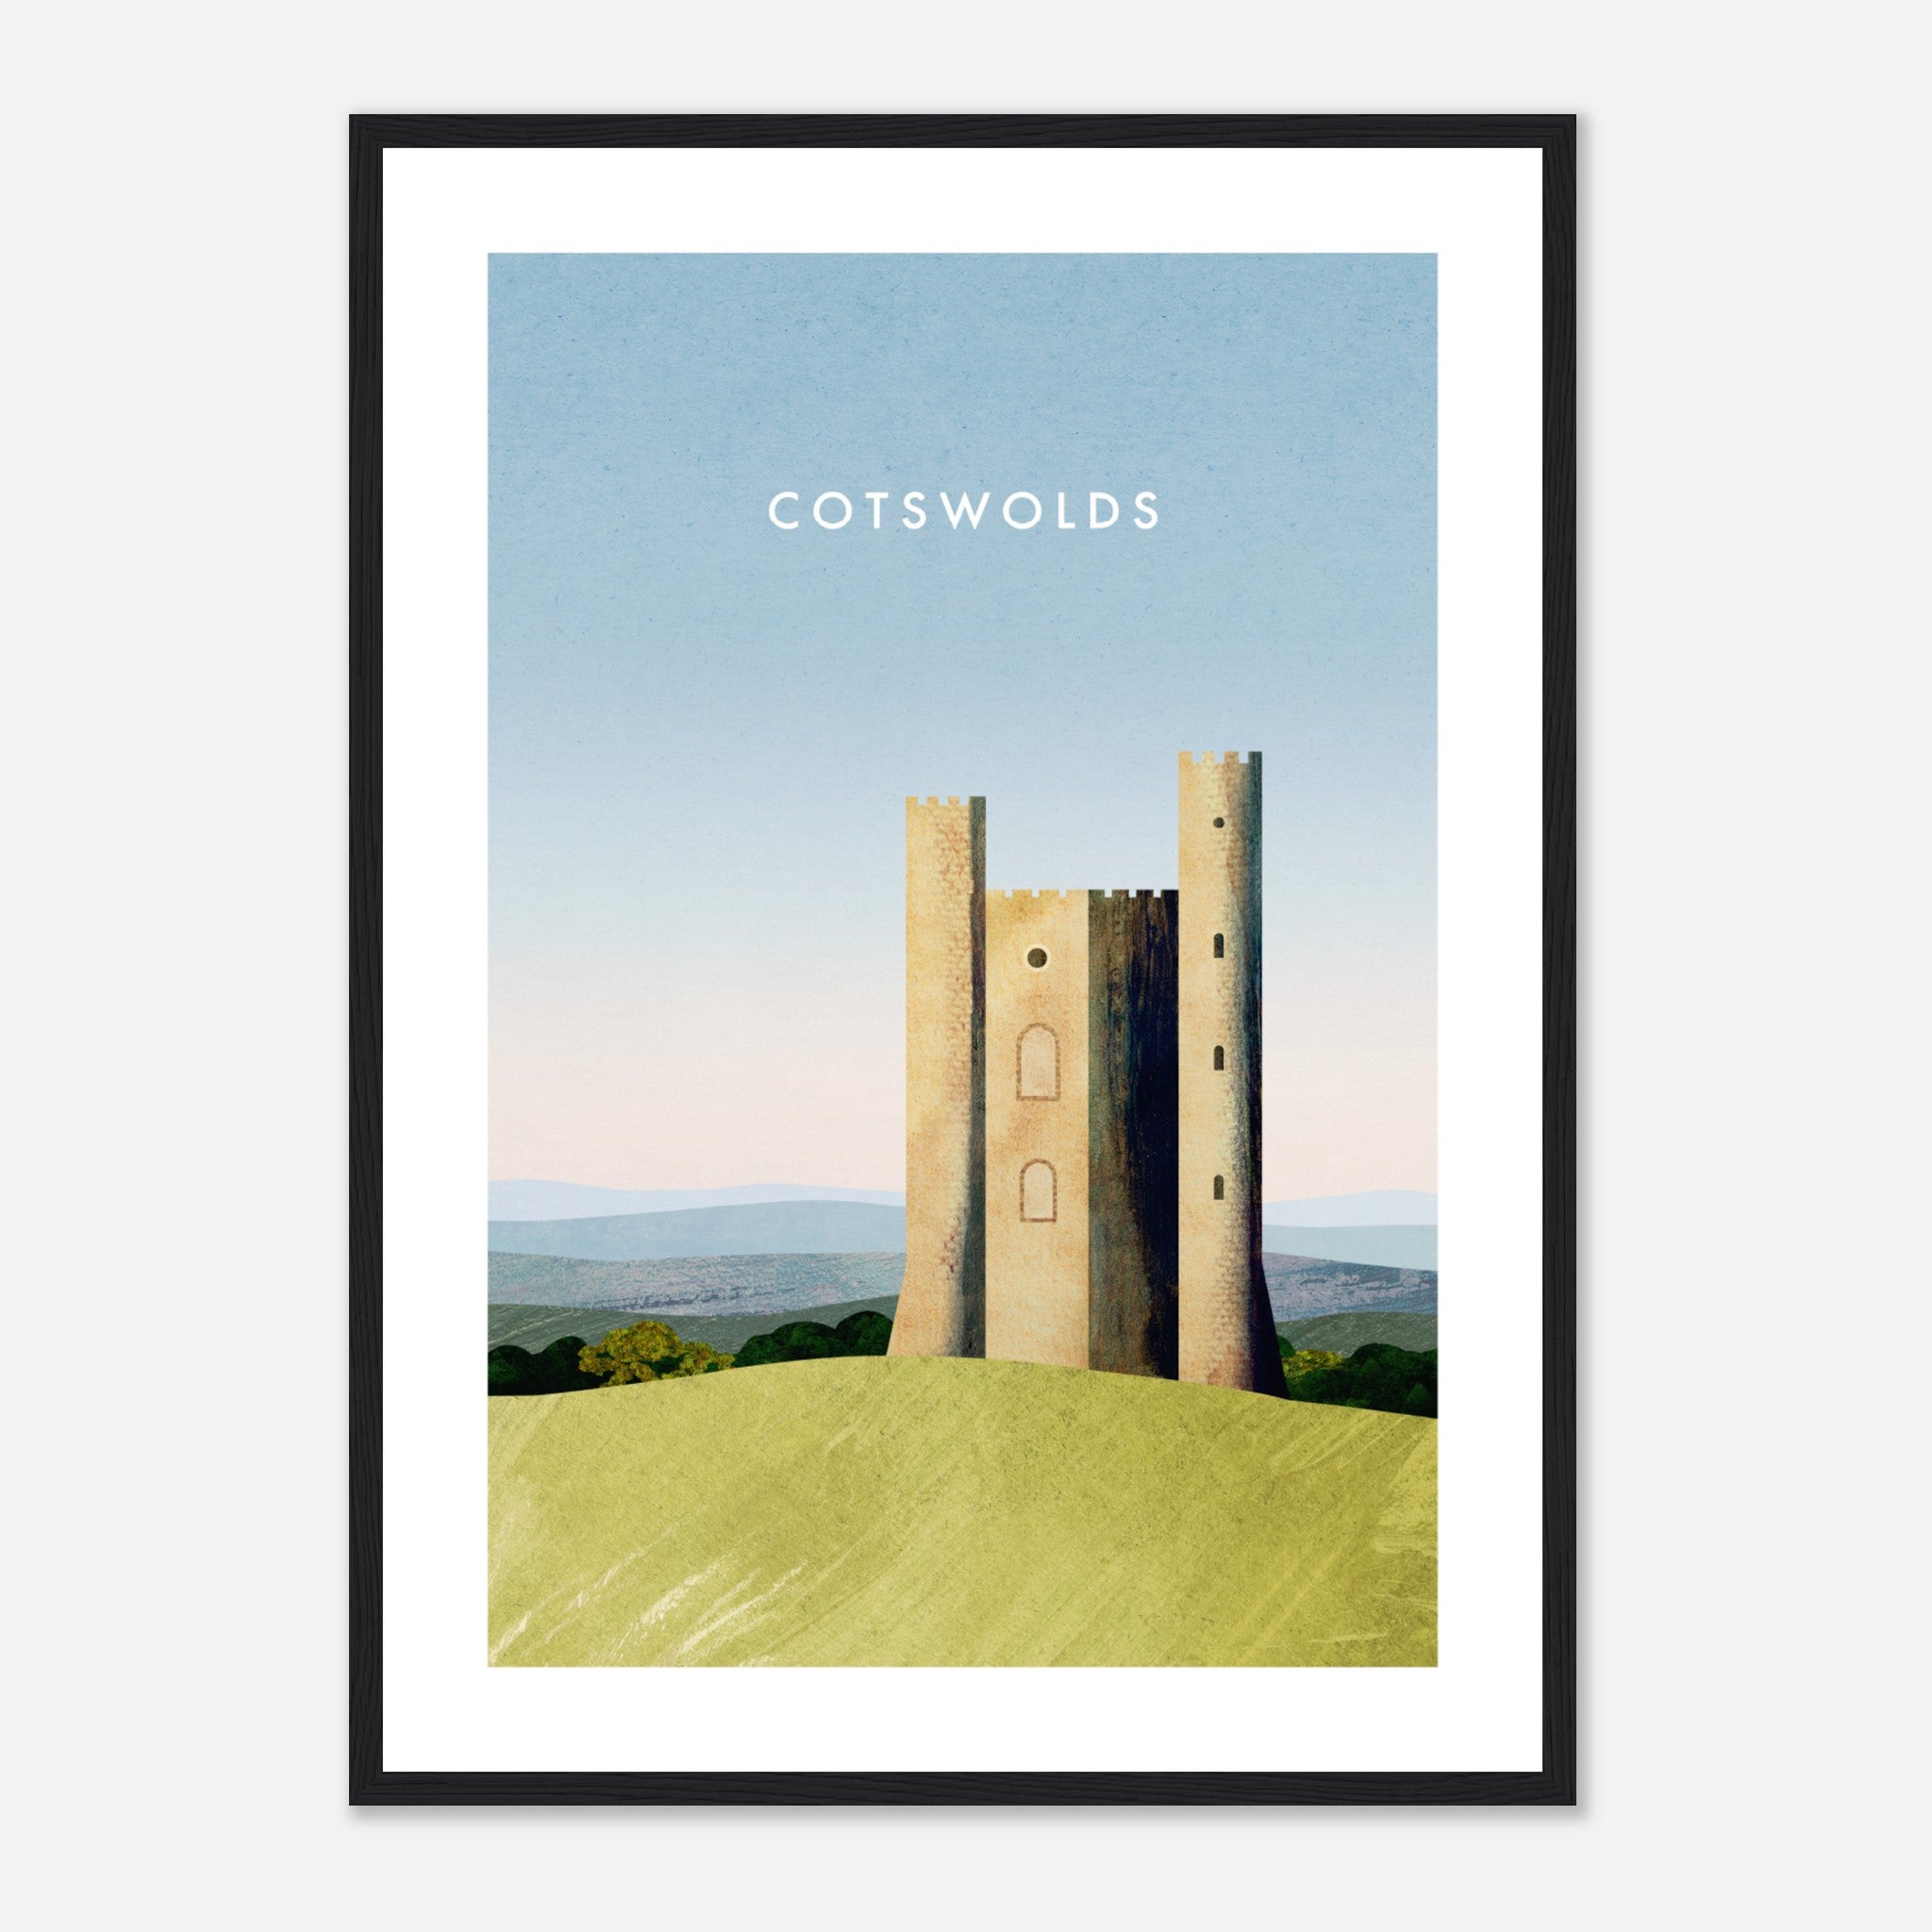 Cotswolds, Broadway Tower Poster